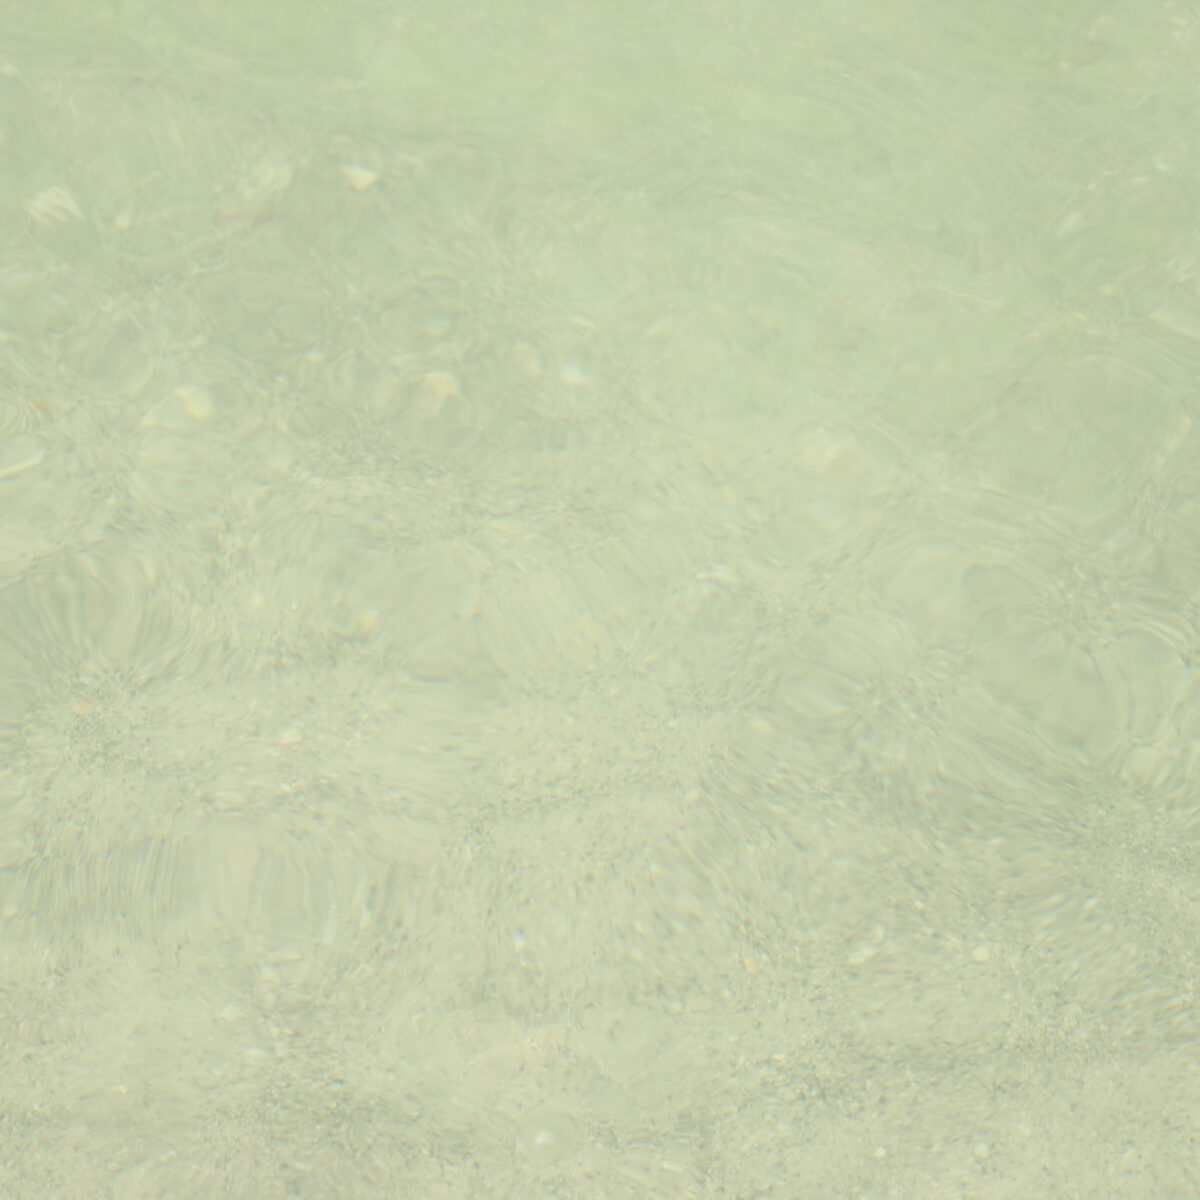 Water and Sand Textures Preview 05